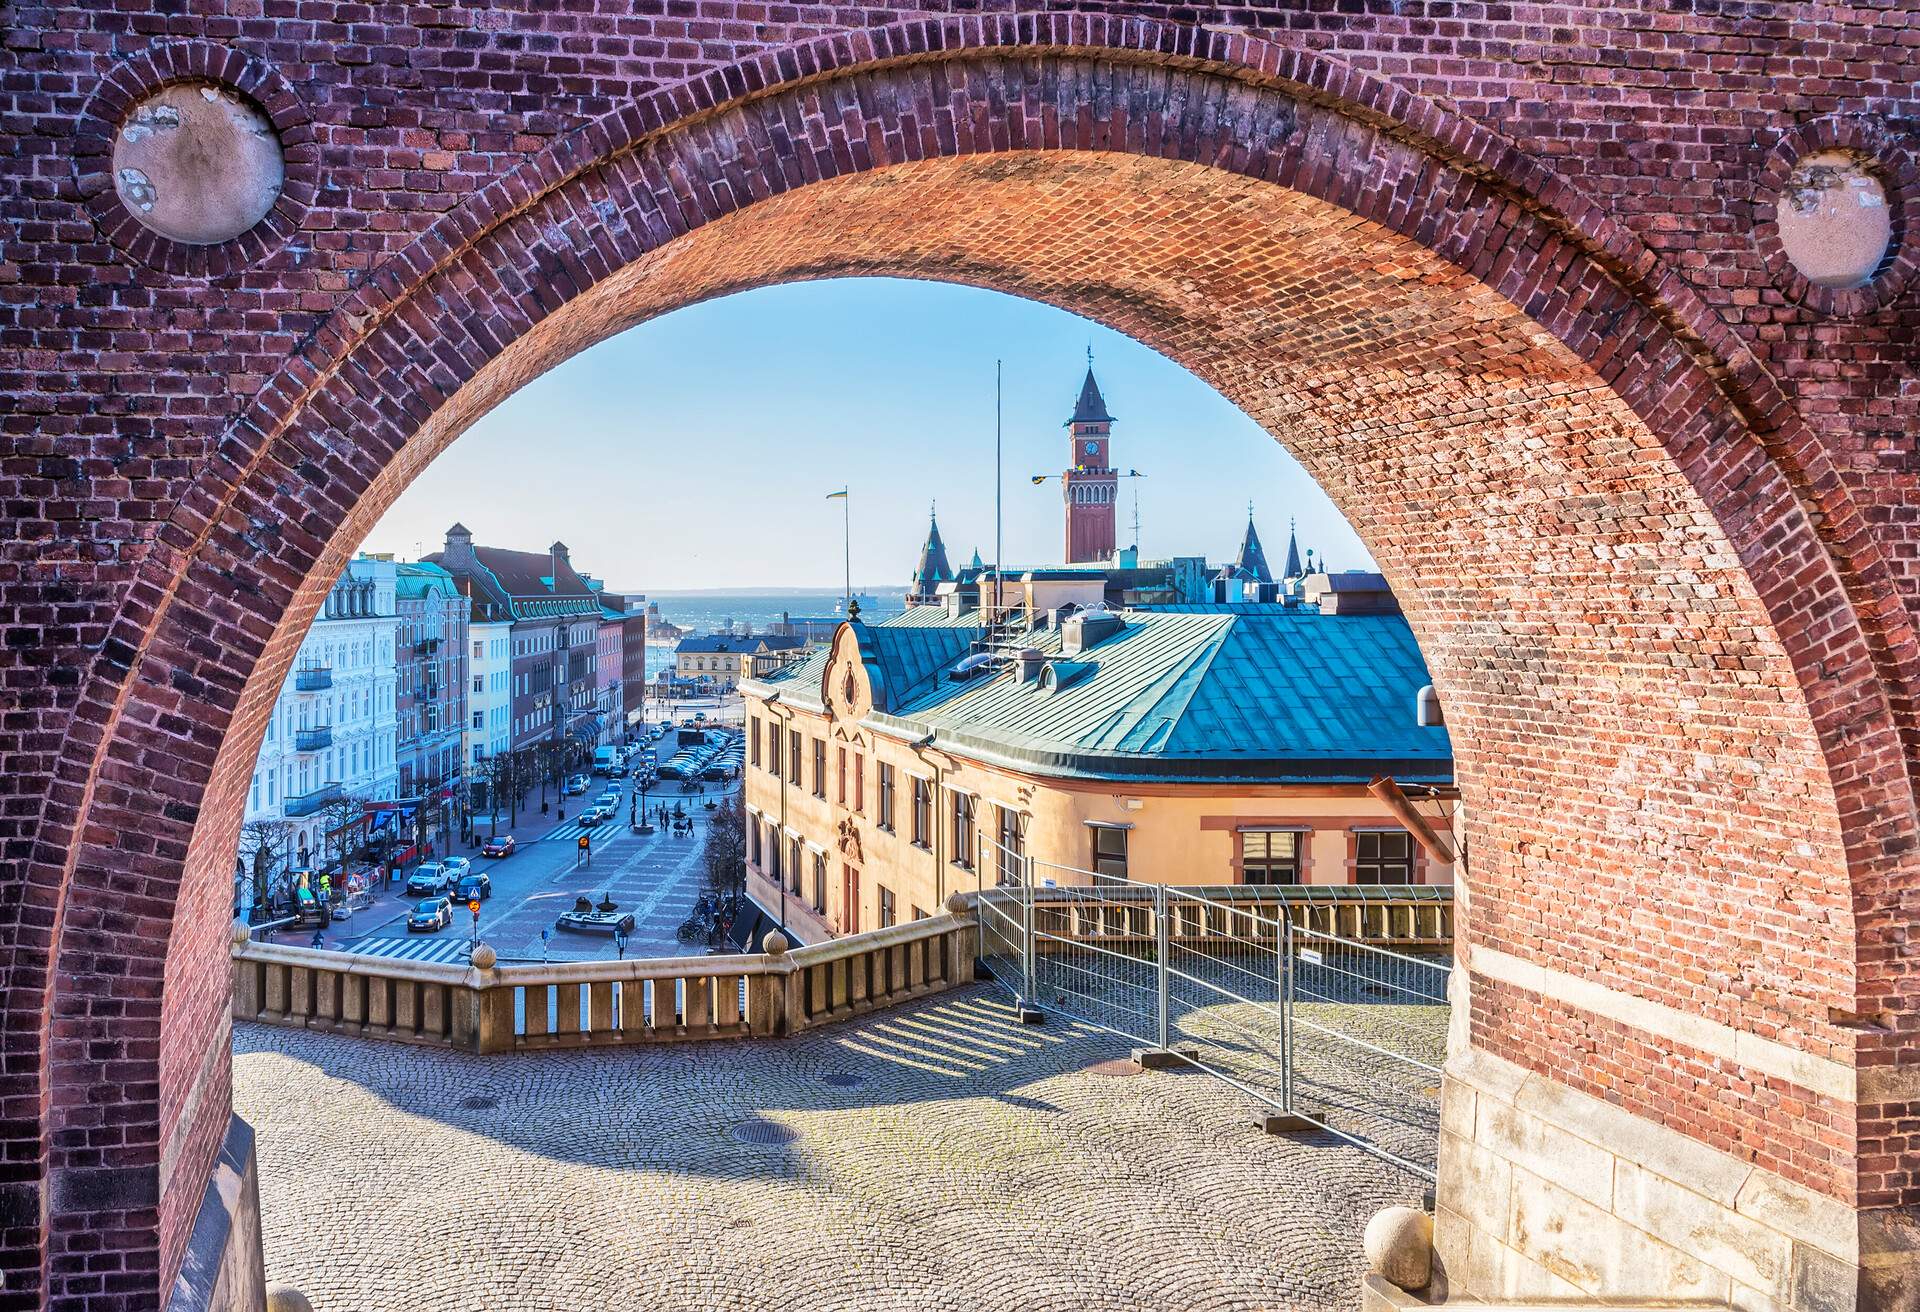 An elevated view through an archway of the swedish city of Helsingborg.